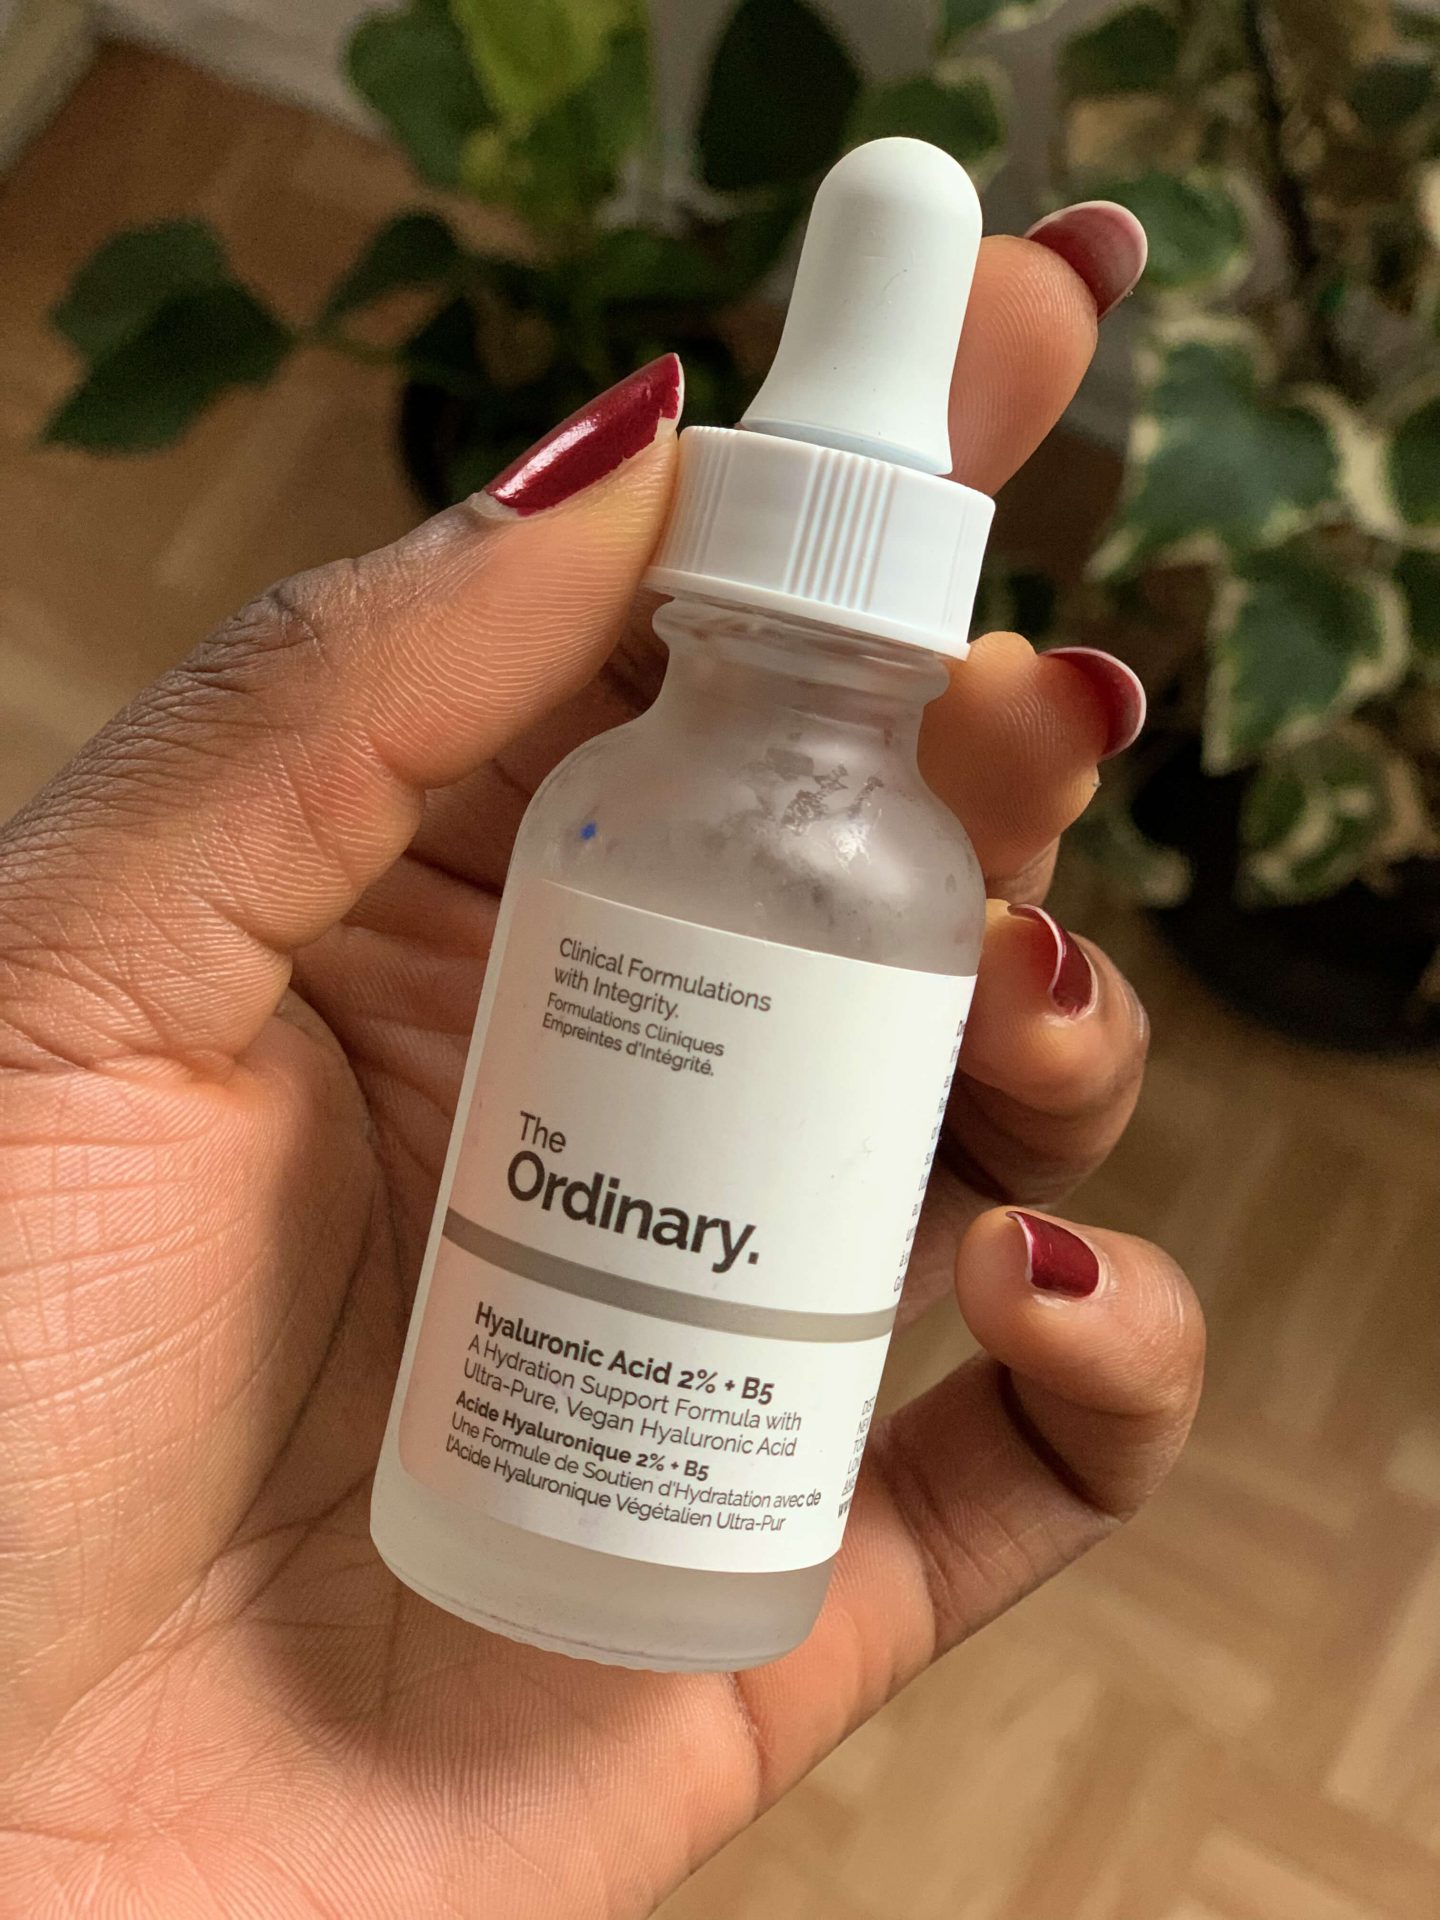 Hyaluronic Acid-The Ordinary